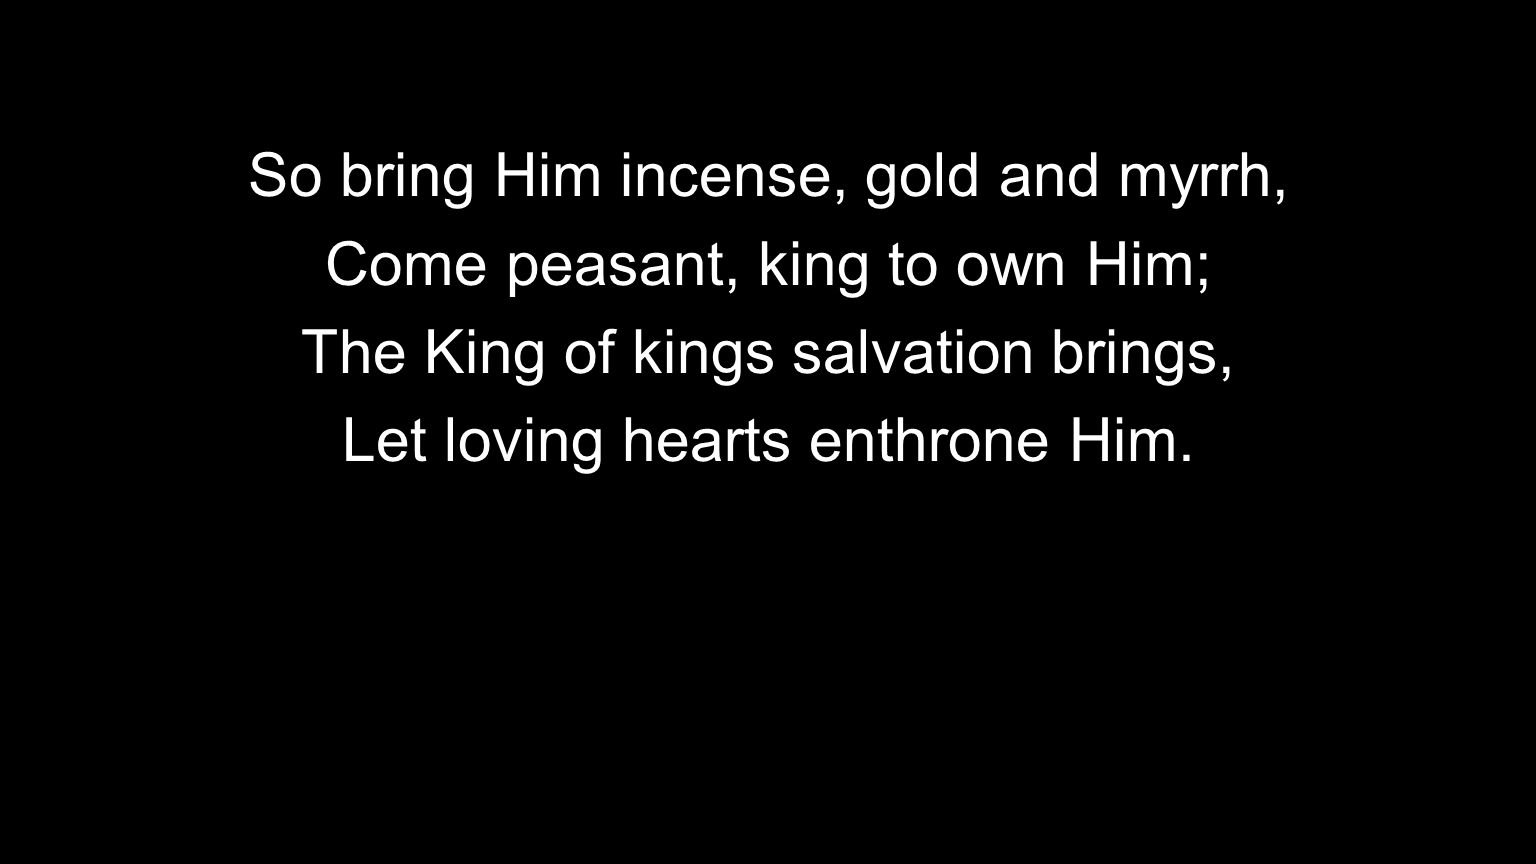 So bring Him incense, gold and myrrh, Come peasant, king to own Him;